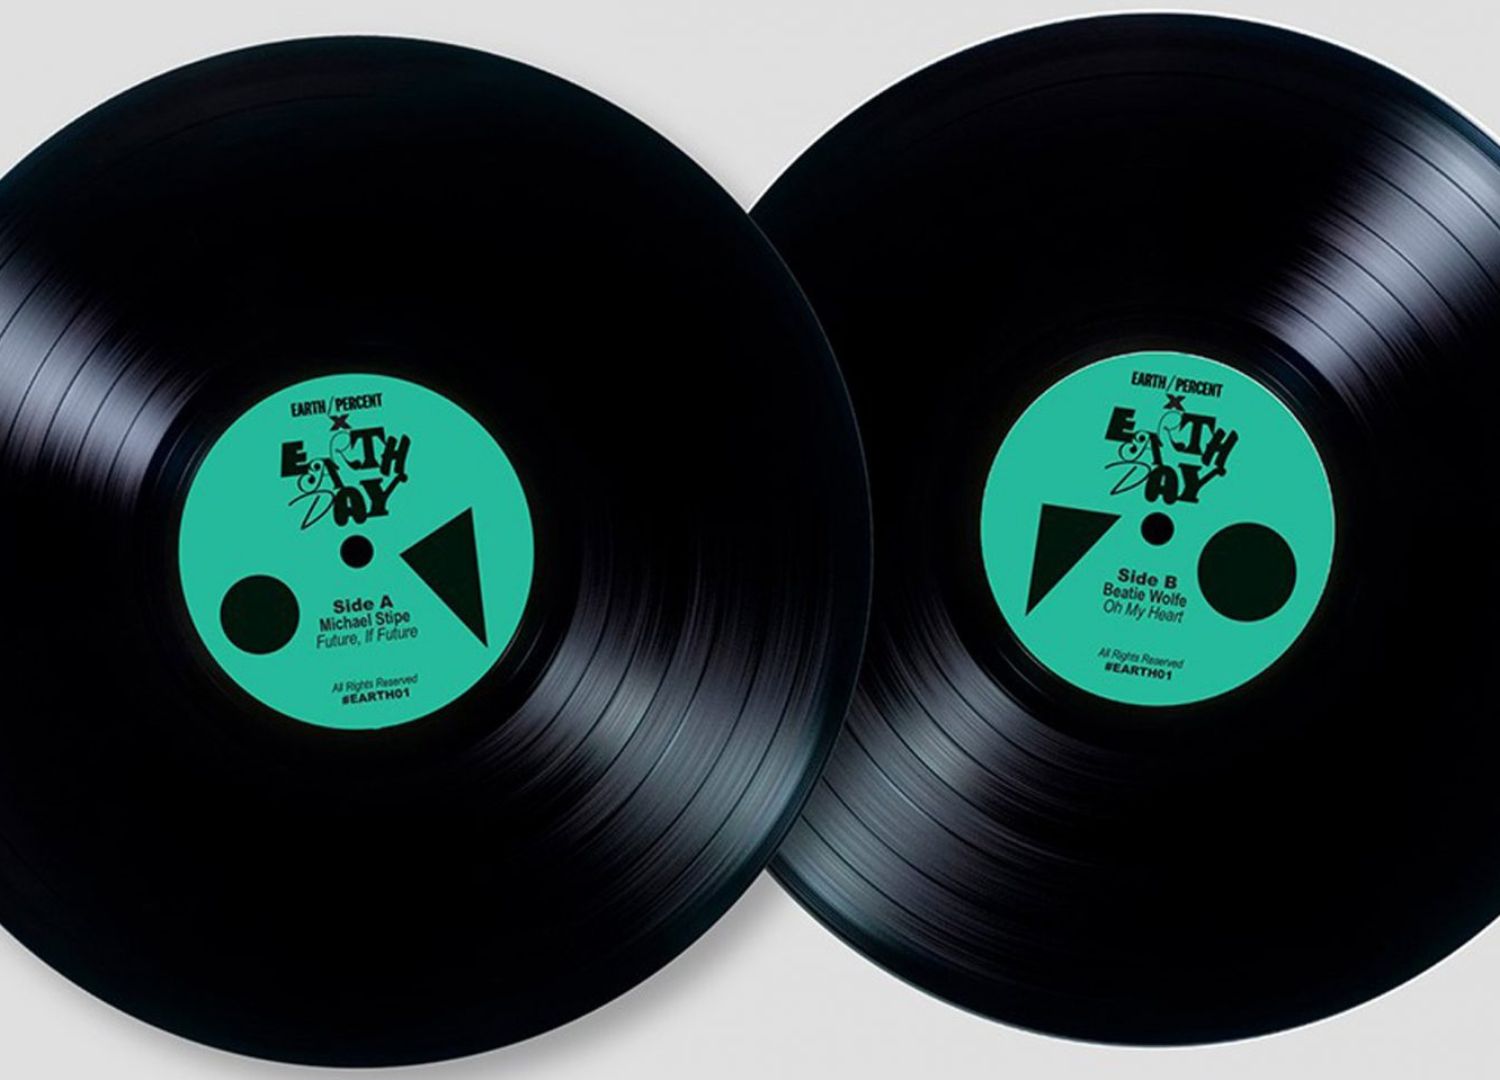 Vinyl Record by Evolution Music - 5 projects that explore different uses for bioplastics